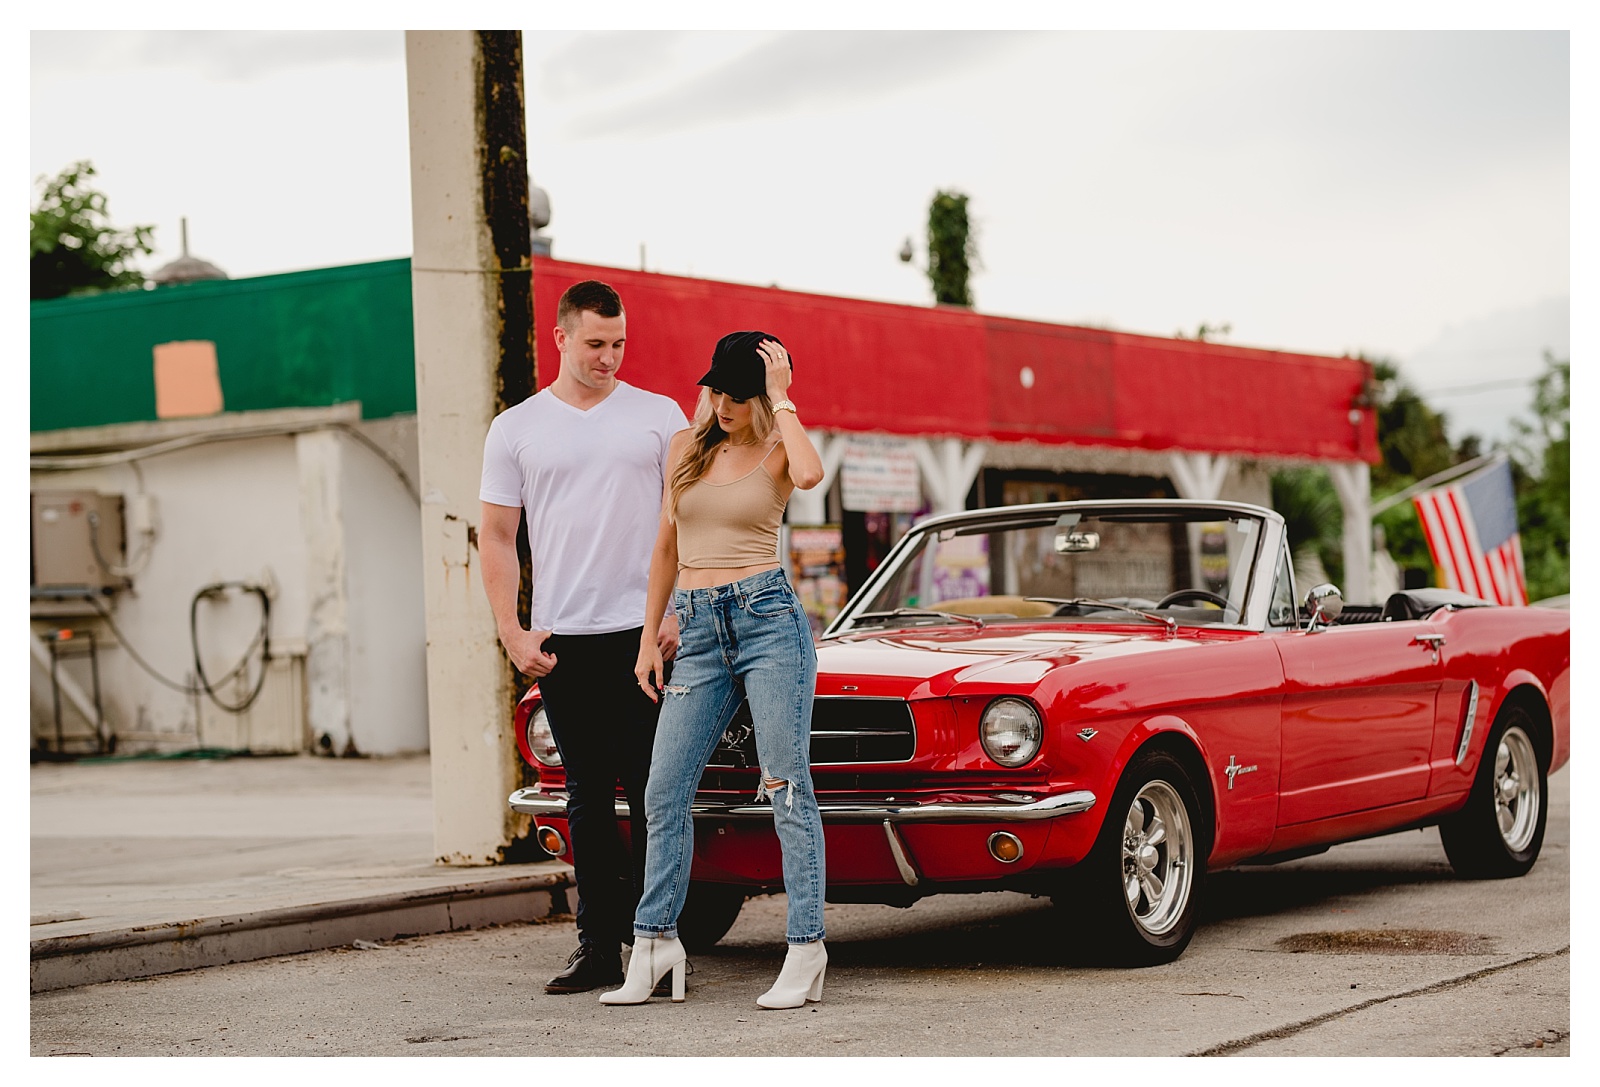 Tallahassee, Florida engagement session featuring old red car.